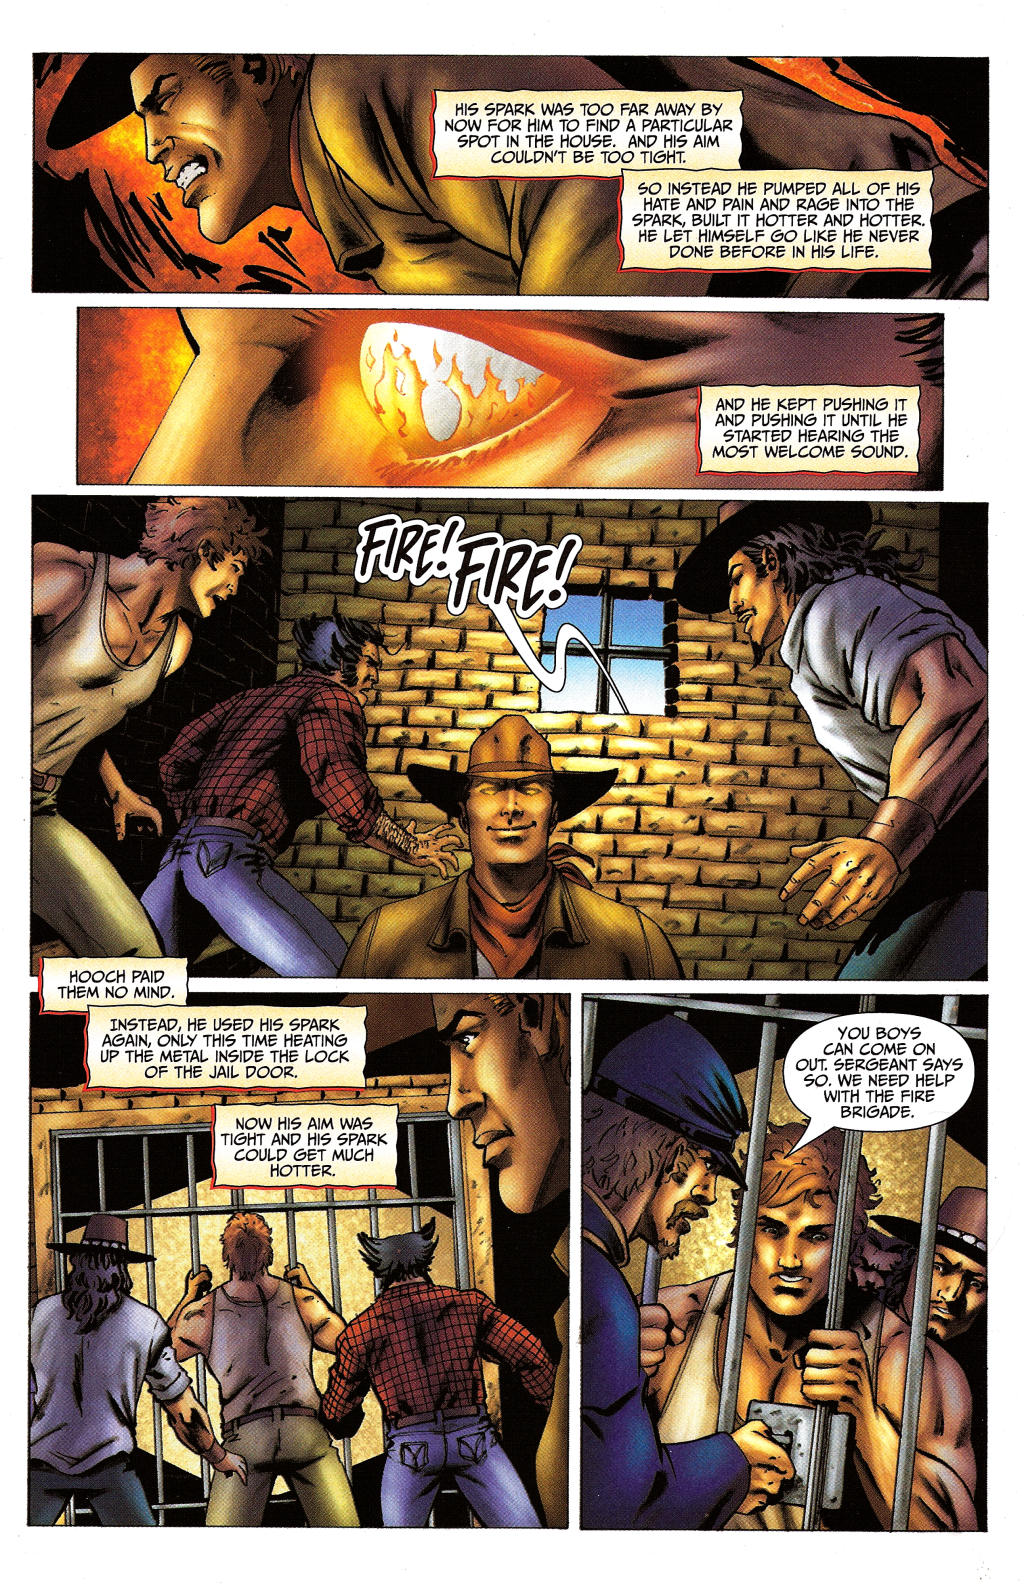 Red Prophet: The Tales of Alvin Maker issue 4 - Page 18